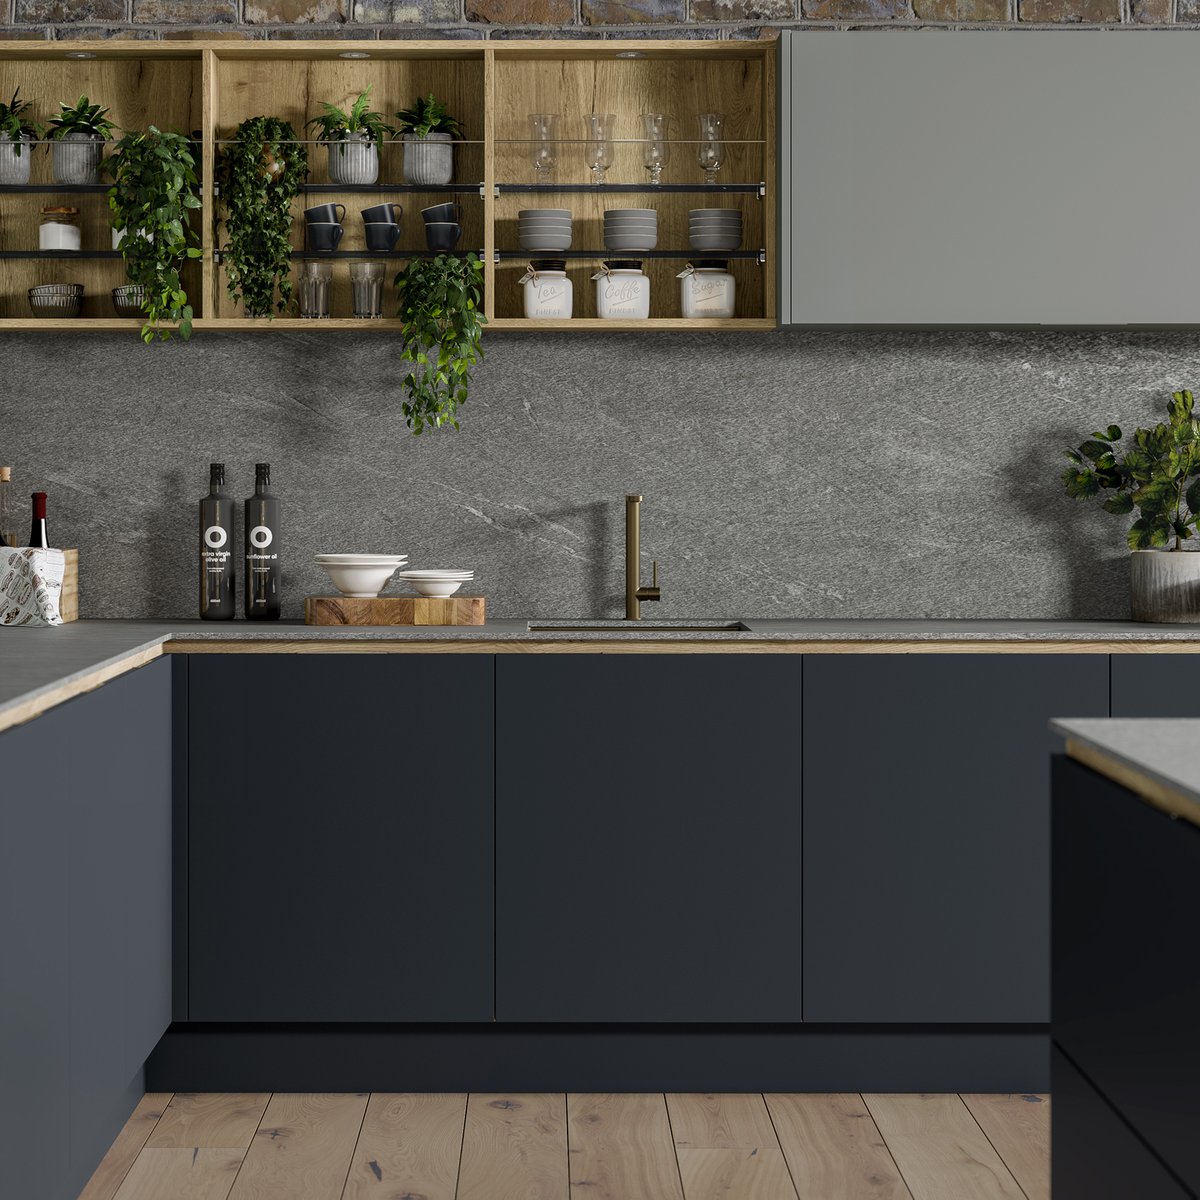 The dark and sophisticated Ceralsio Slate worktops really make an impact in this contemporary kitchen. The surface looks just like slate with a slightly worn effect lending it character. Thanks for sharing @VolpiKitchens!
#LoveVolpi #ceramic #contemporarykitchen